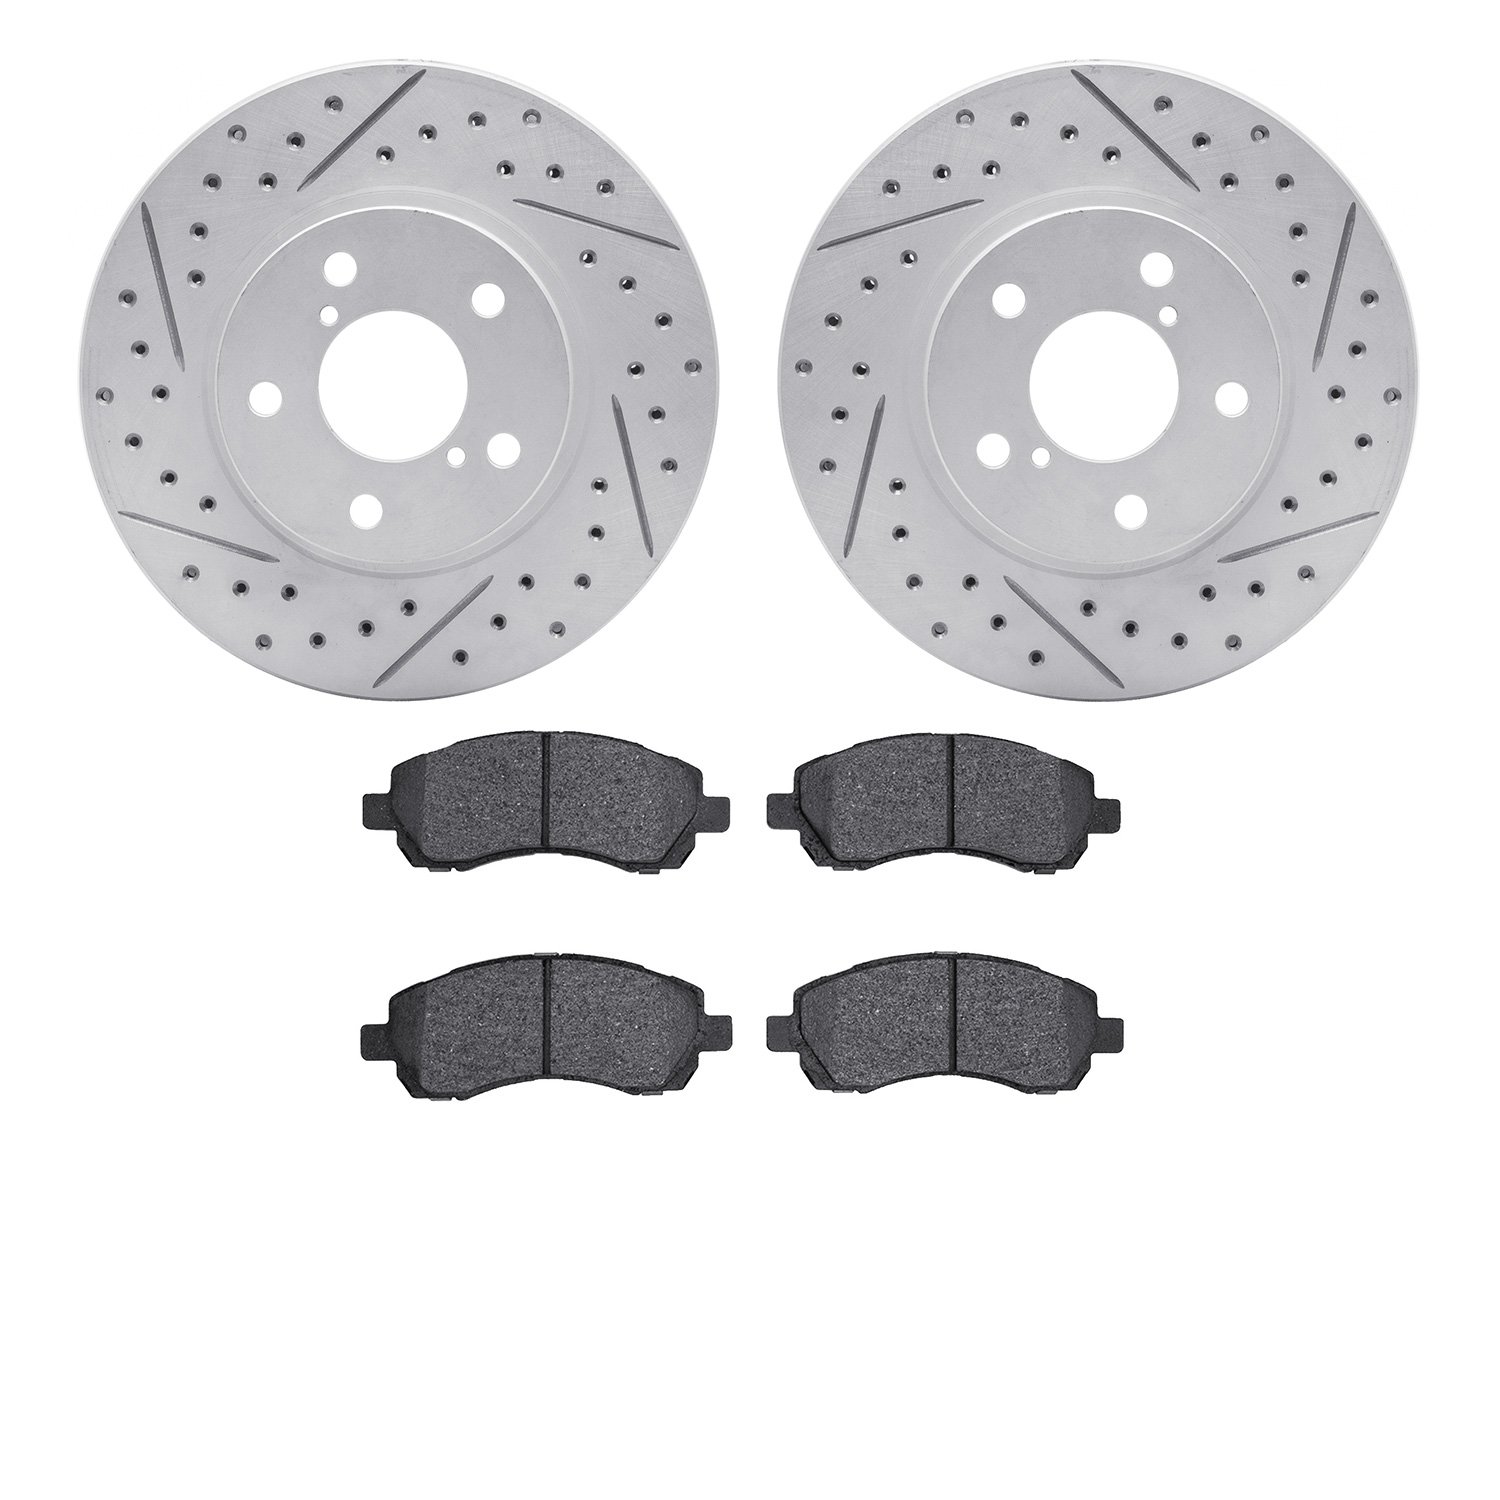 2502-13001 Geoperformance Drilled/Slotted Rotors w/5000 Advanced Brake Pads Kit, 1997-2001 Subaru, Position: Front